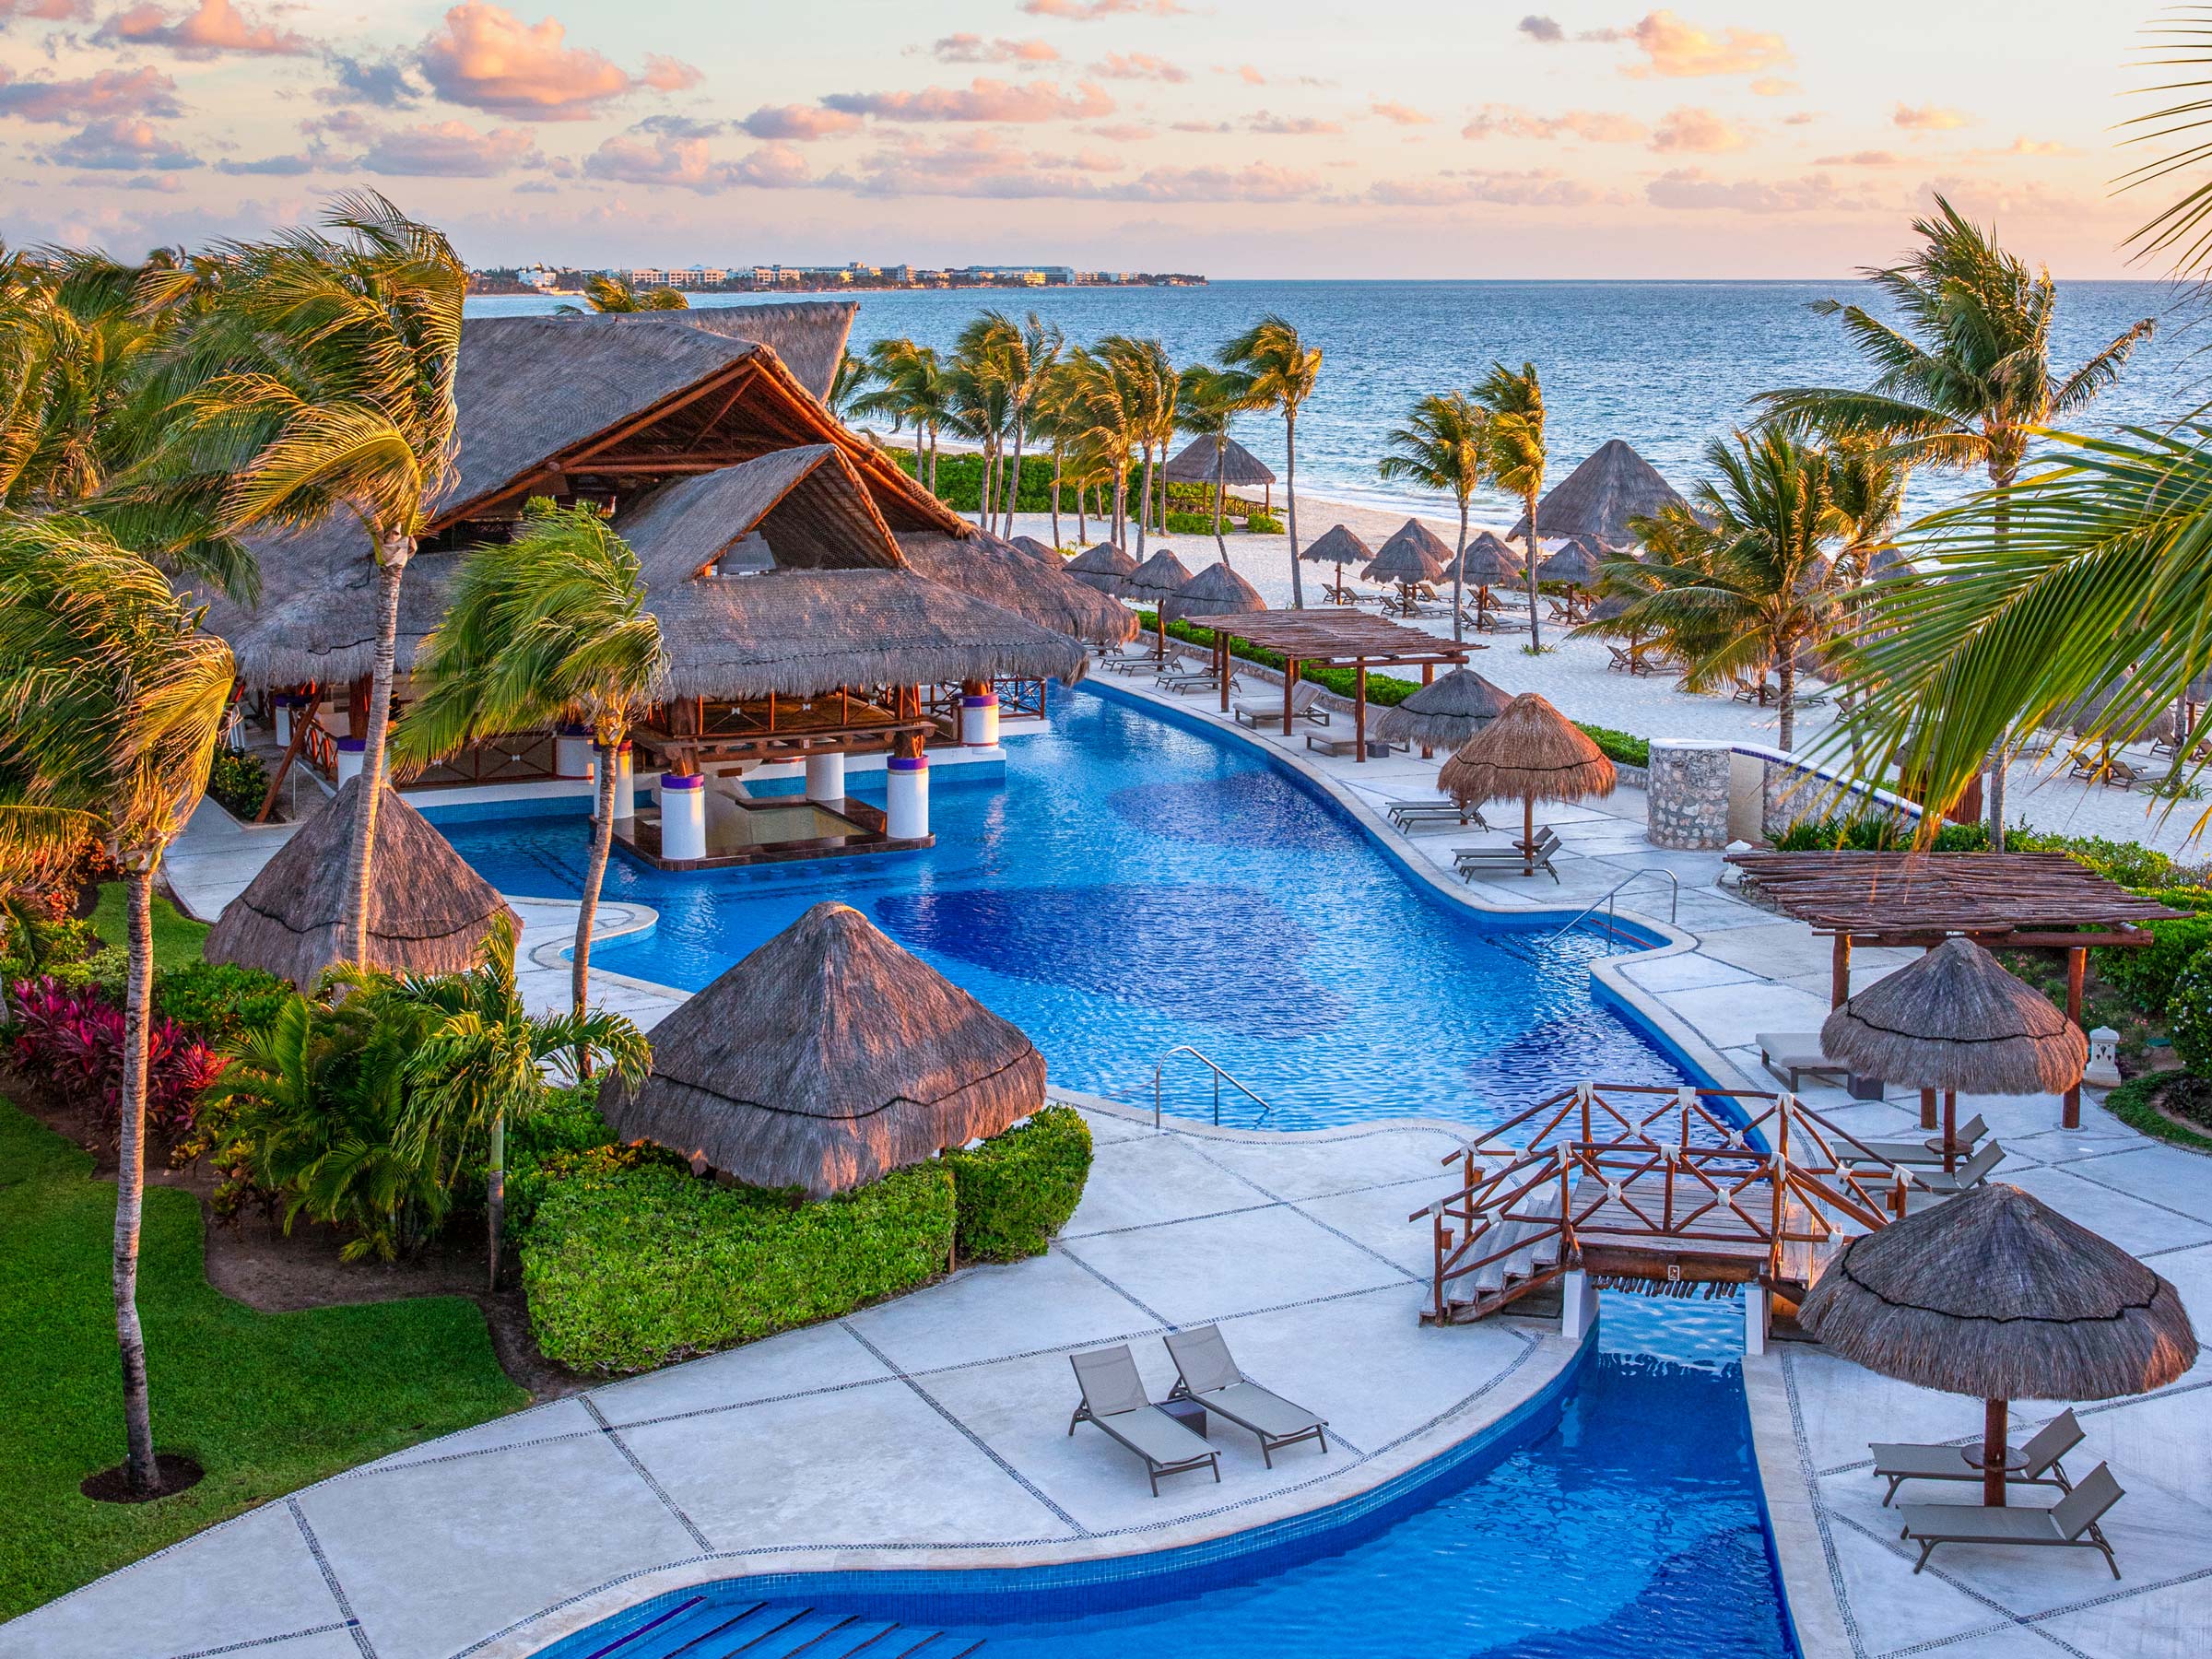 Stay at One of Our Luxury Caribbean Resorts in Mexico